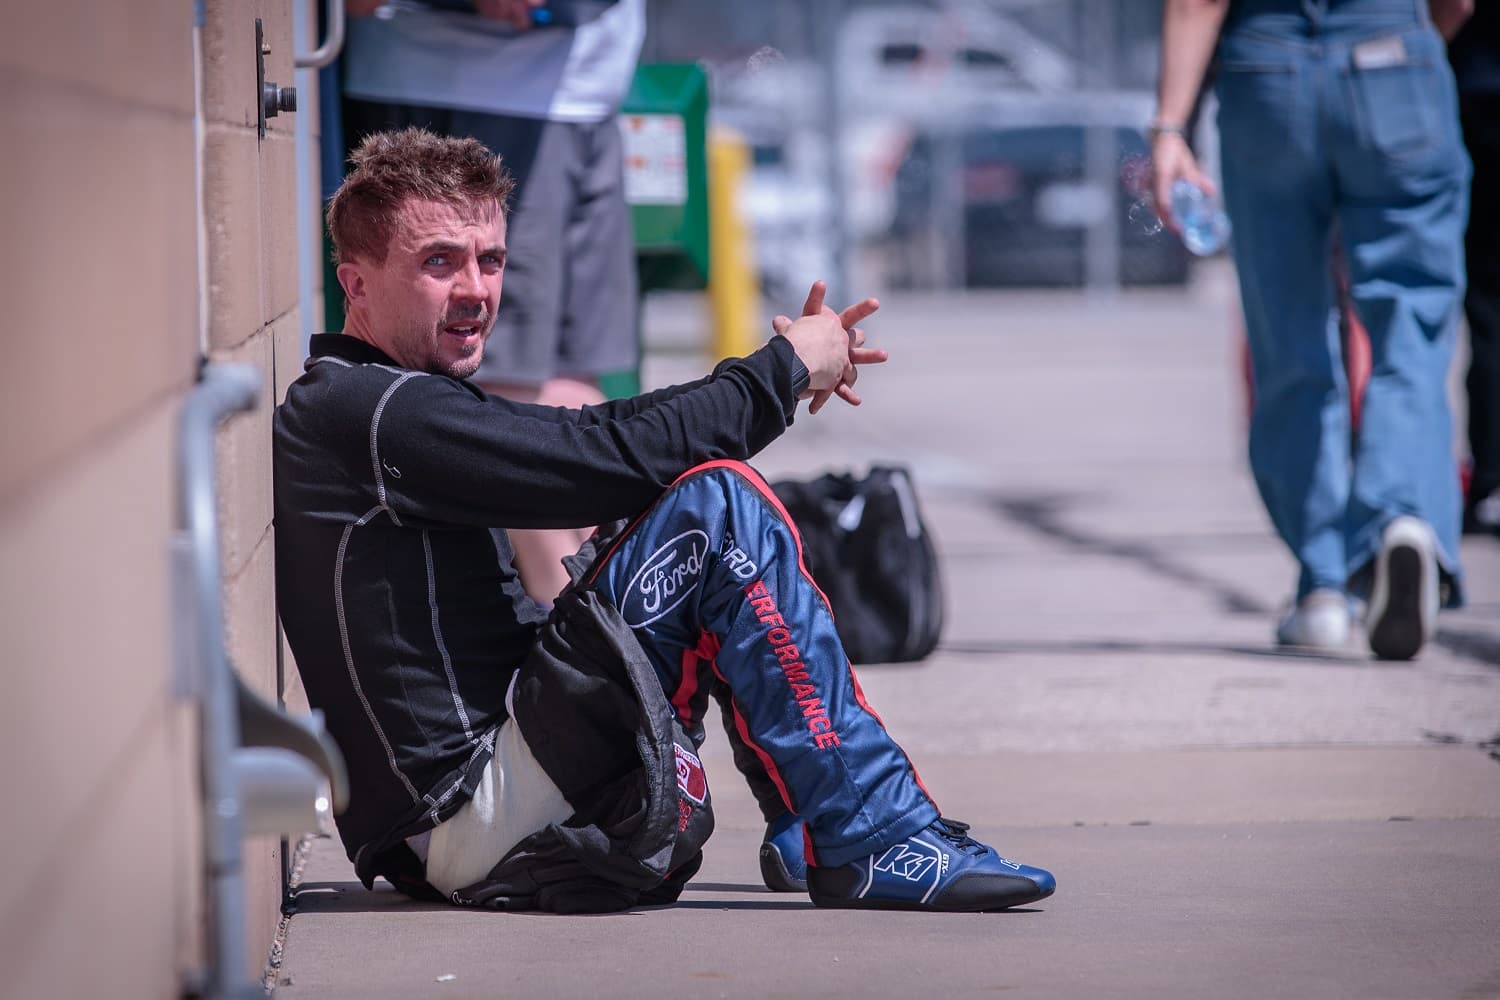 Driver and actor Frankie Muniz sits in the pits following the ARCA Menards Series Dawn 150 at Kansas Speedway in Kansas City, Kansas. | William Purnell/Icon Sportswire via Getty Images